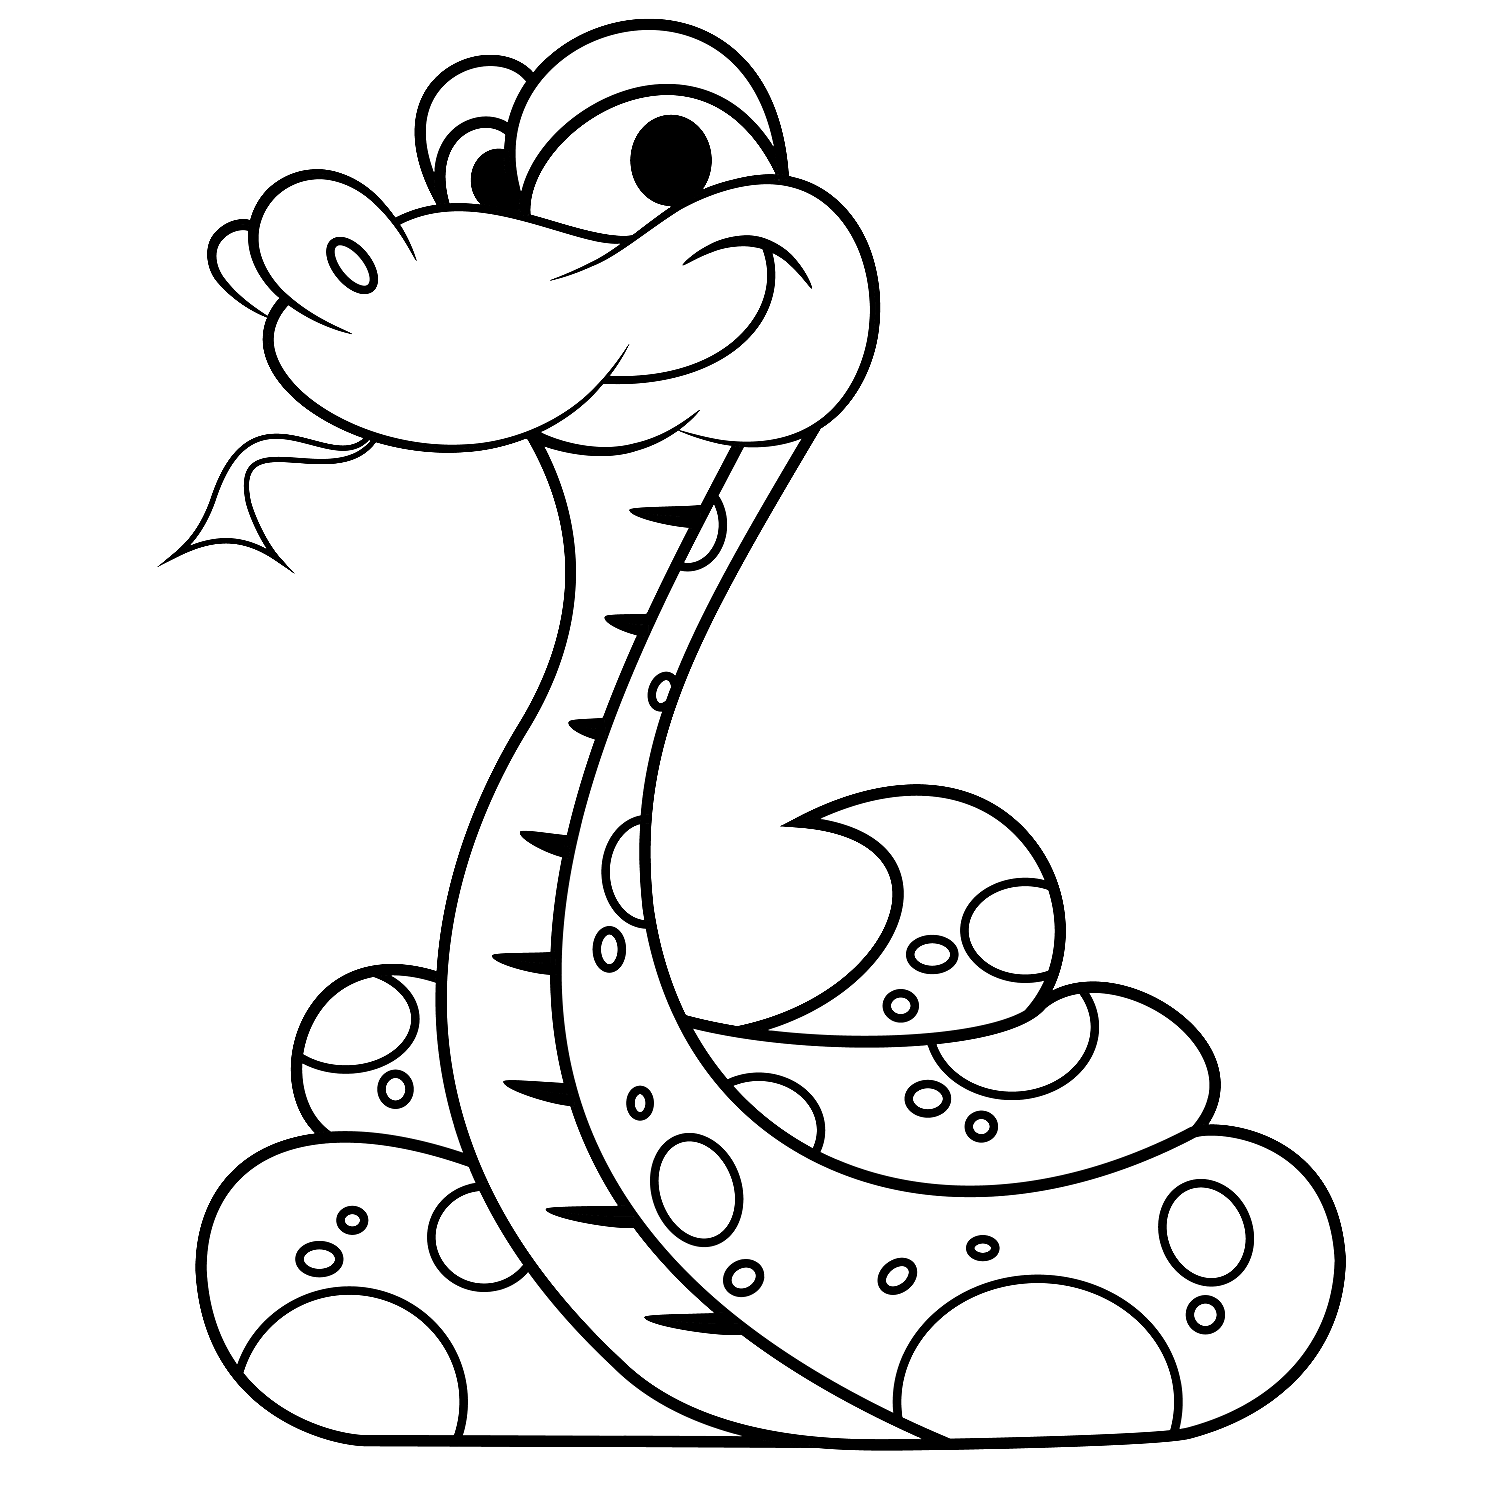 coloring pages of a snake free printable snake coloring pages for kids a of pages coloring snake 